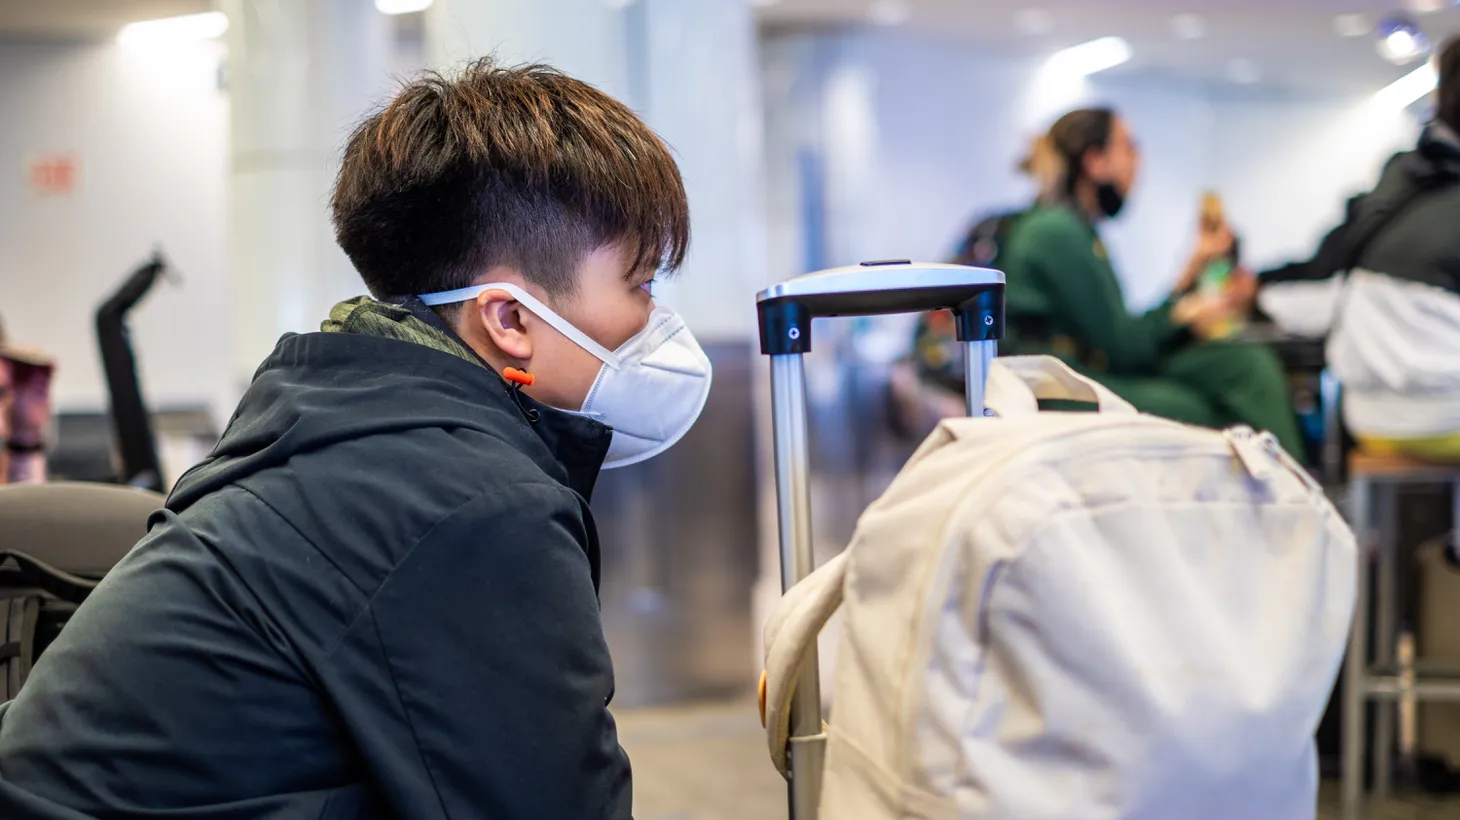 A man wears a K-N95 mask at LAX airport, May 22, 2022. The U.S. health care system is not optimally prepared to handle long COVID, and people should protect themselves by wearing masks and reducing time in places where a lot of viruses could be around, says Ziyad Al-Aly, clinical epidemiologist at Washington University.